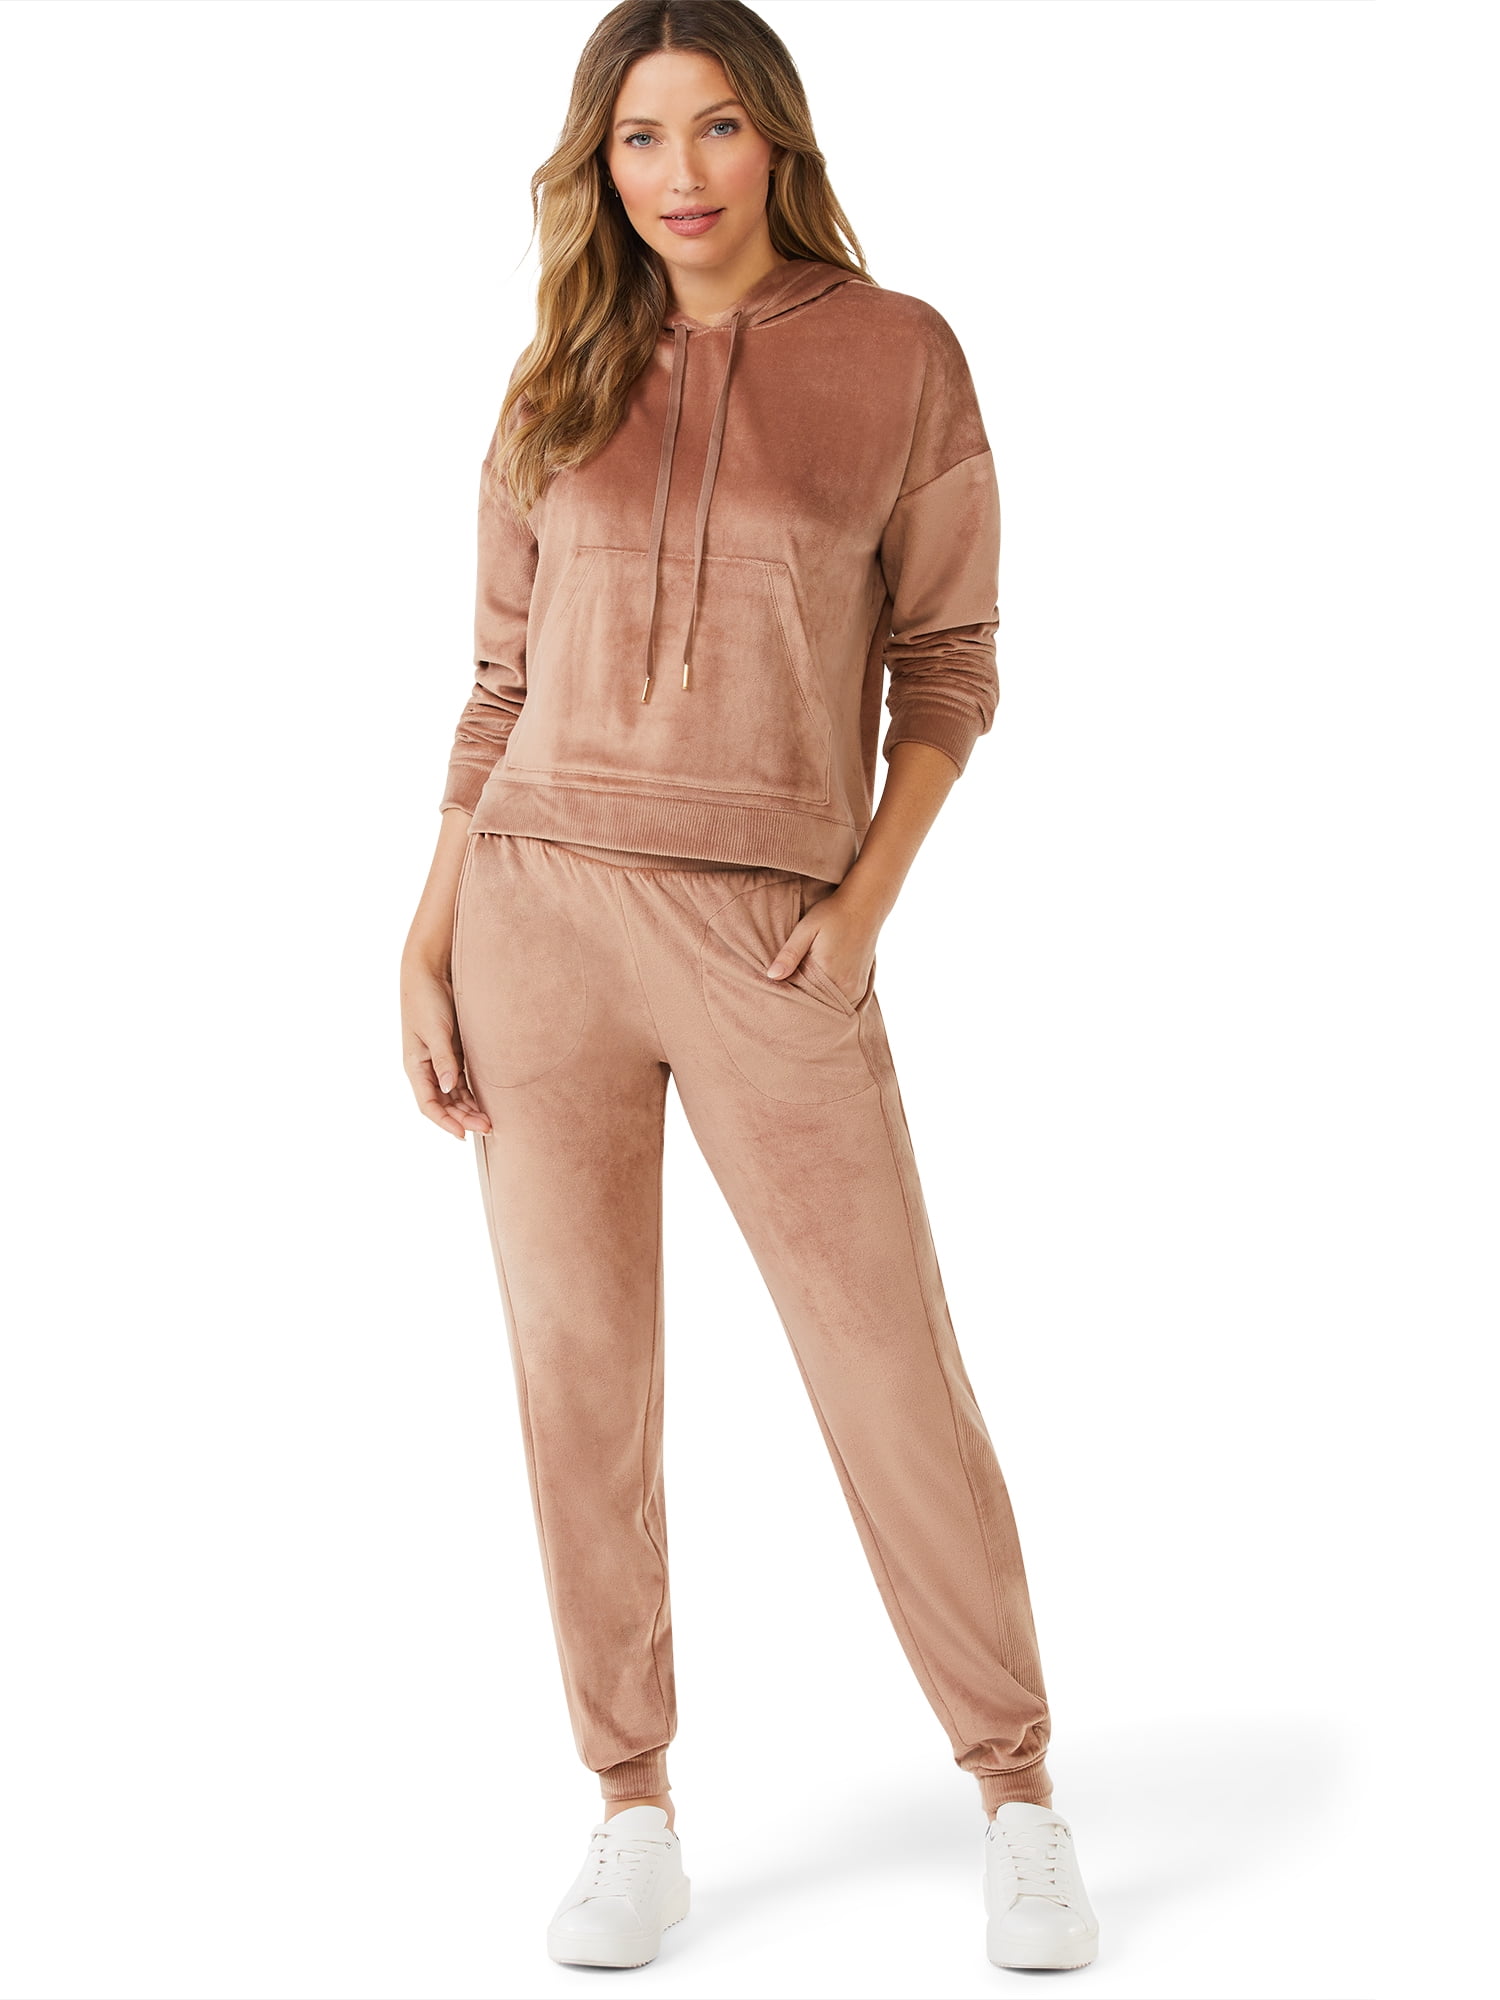 Sofia Intimates by Sofia Vergara Women's and Women's Plus Size Cropped  Hoodie and Jogger Pants Set, 2-Piece 